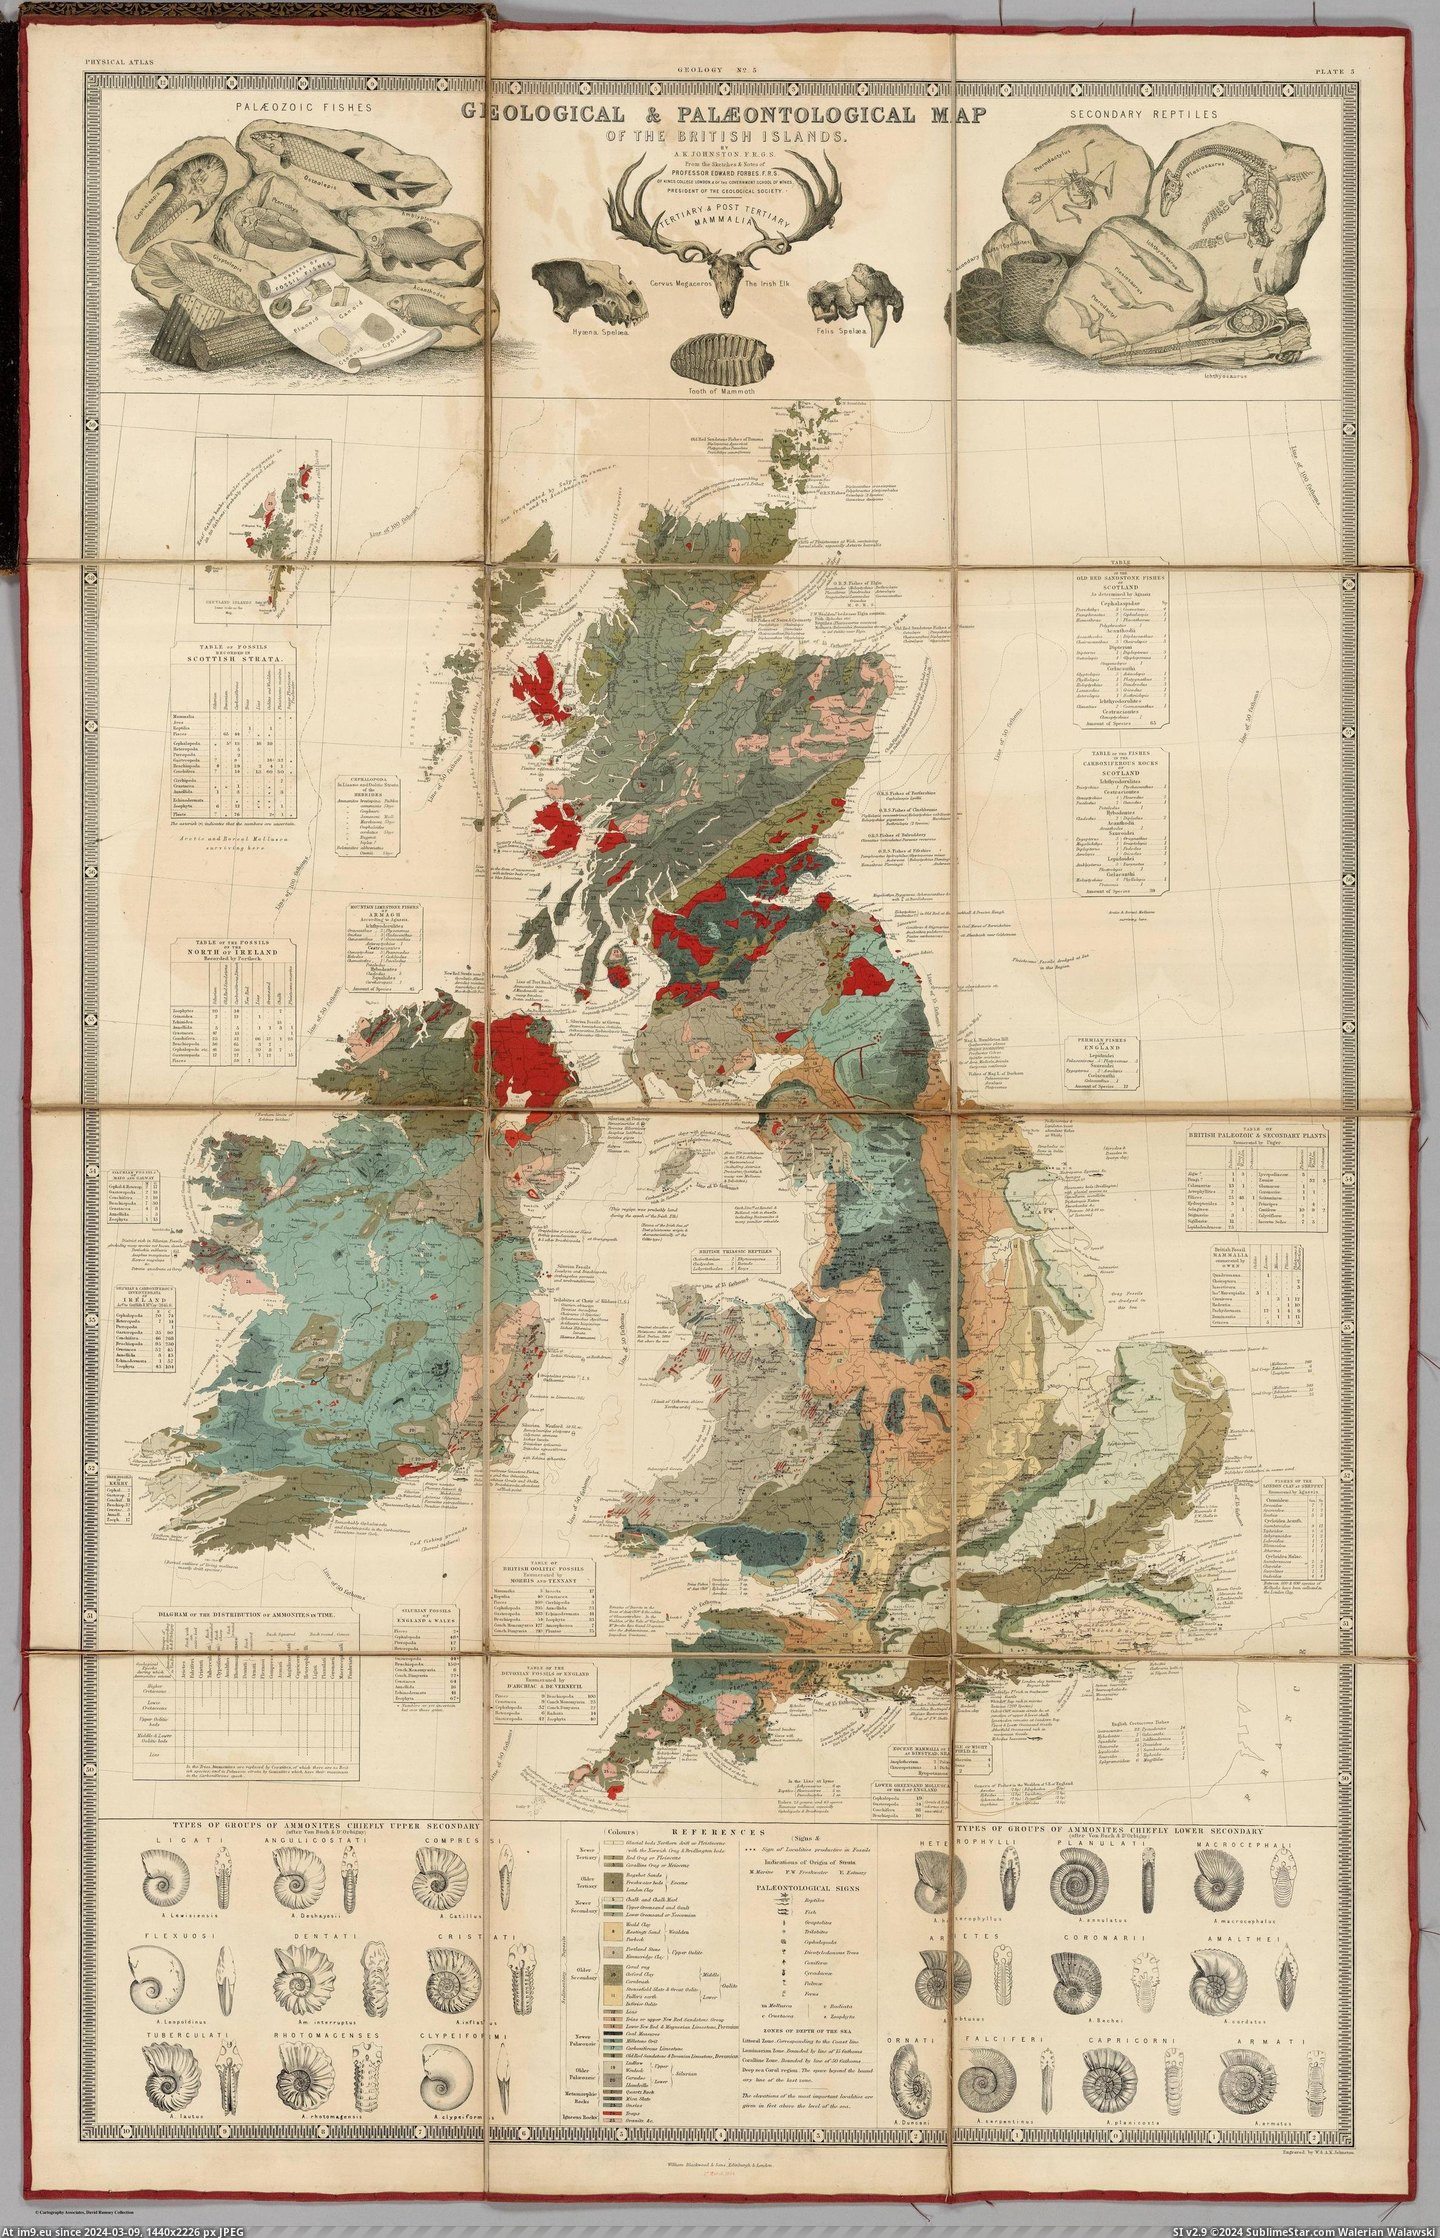 #Map #British #Johnston #Forbes #Palaeontological #Geological #Isles [Mapporn] Palaeontological and geological map of the British Isles, made 1854 by E. Forbes and A. Johnston [2377x3686] Pic. (Image of album My r/MAPS favs))